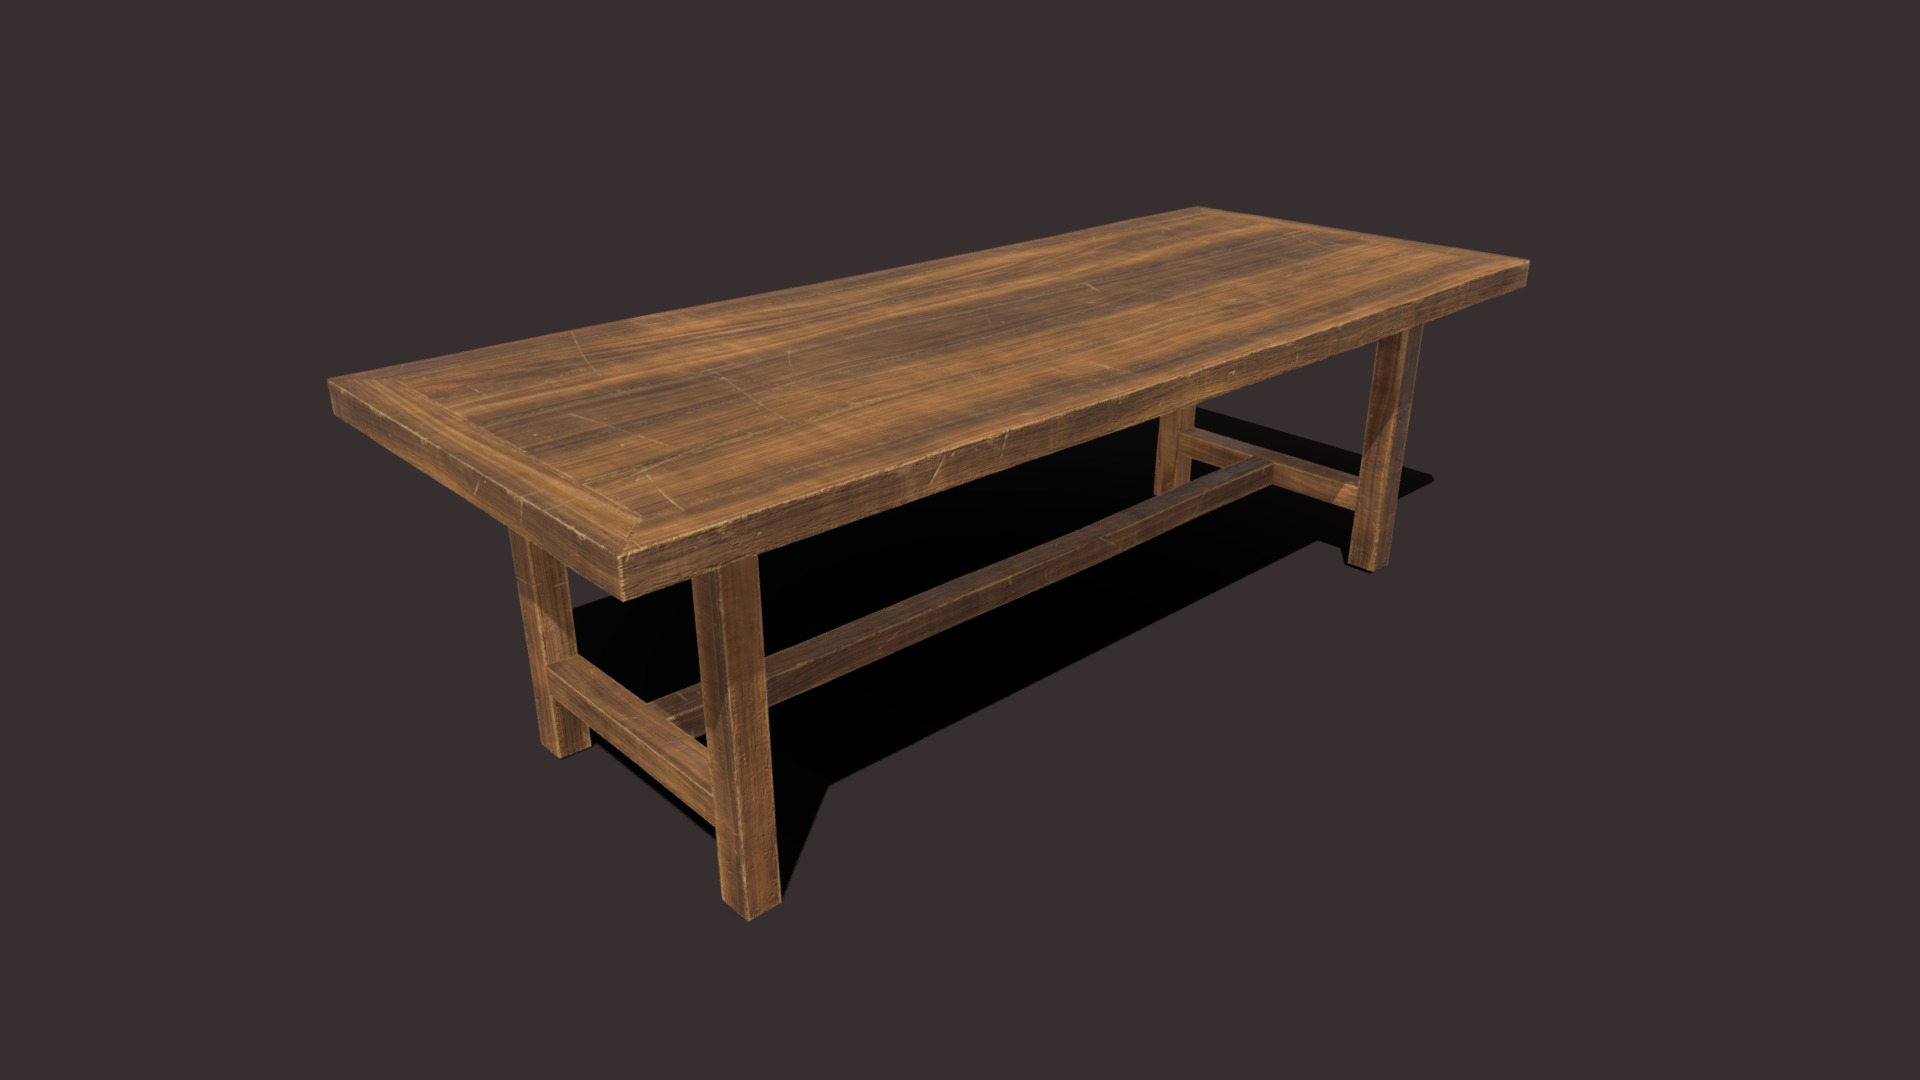 3D model Wooden Long Table - This is a 3D model of the Wooden Long Table. The 3D model is about a wooden table on a black background.